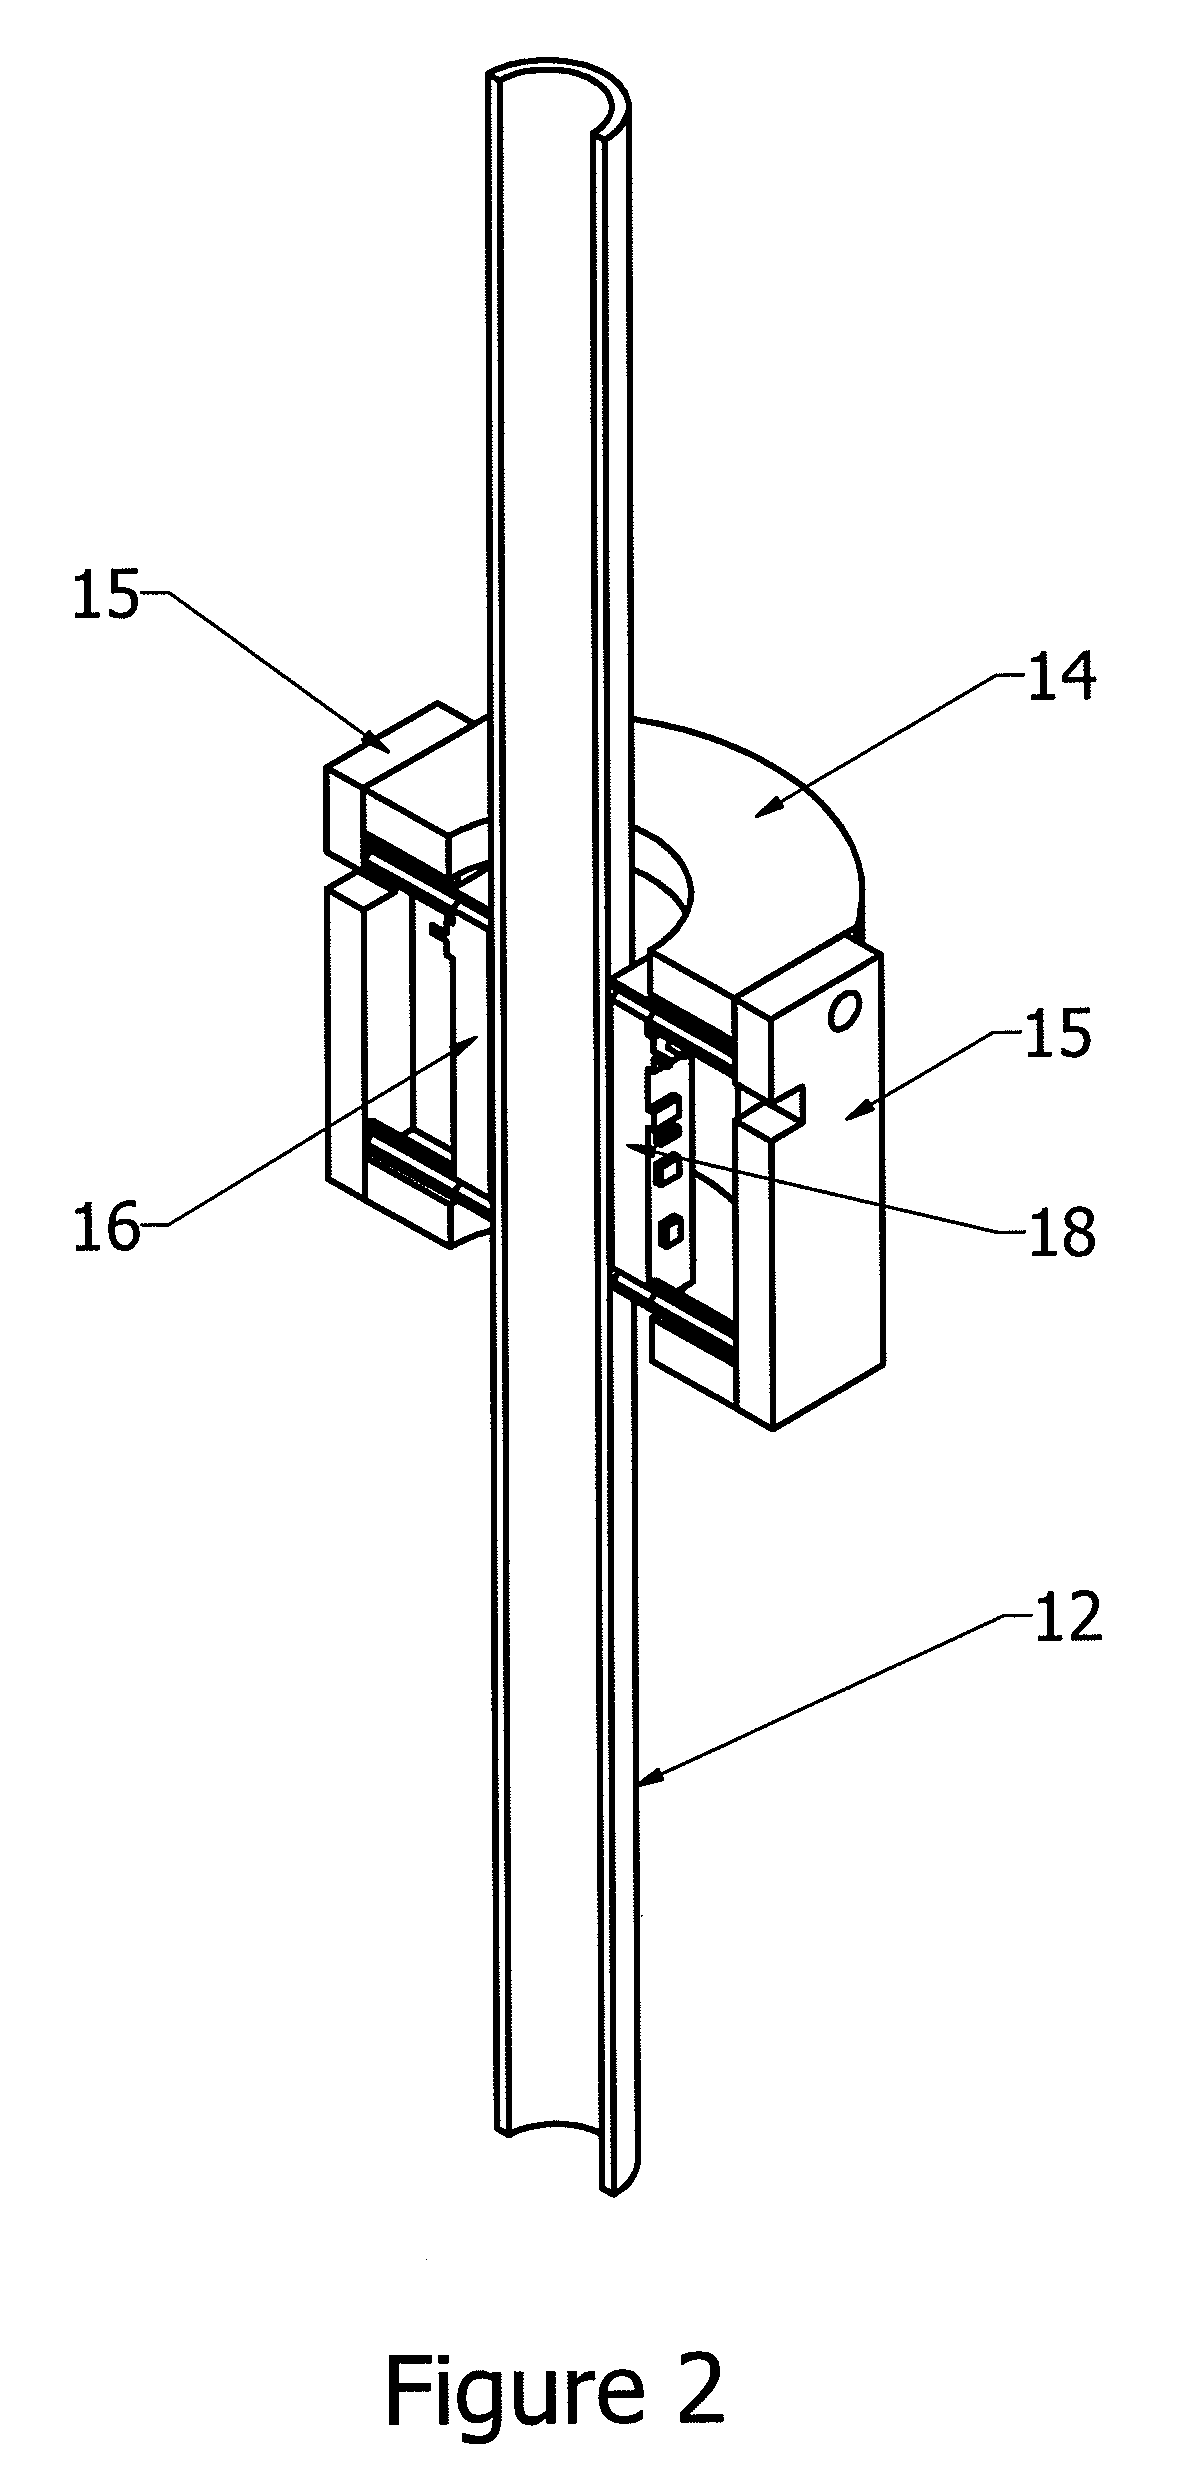 Systems and methods for detecting the presence and/or absence of a solid liquid or gas